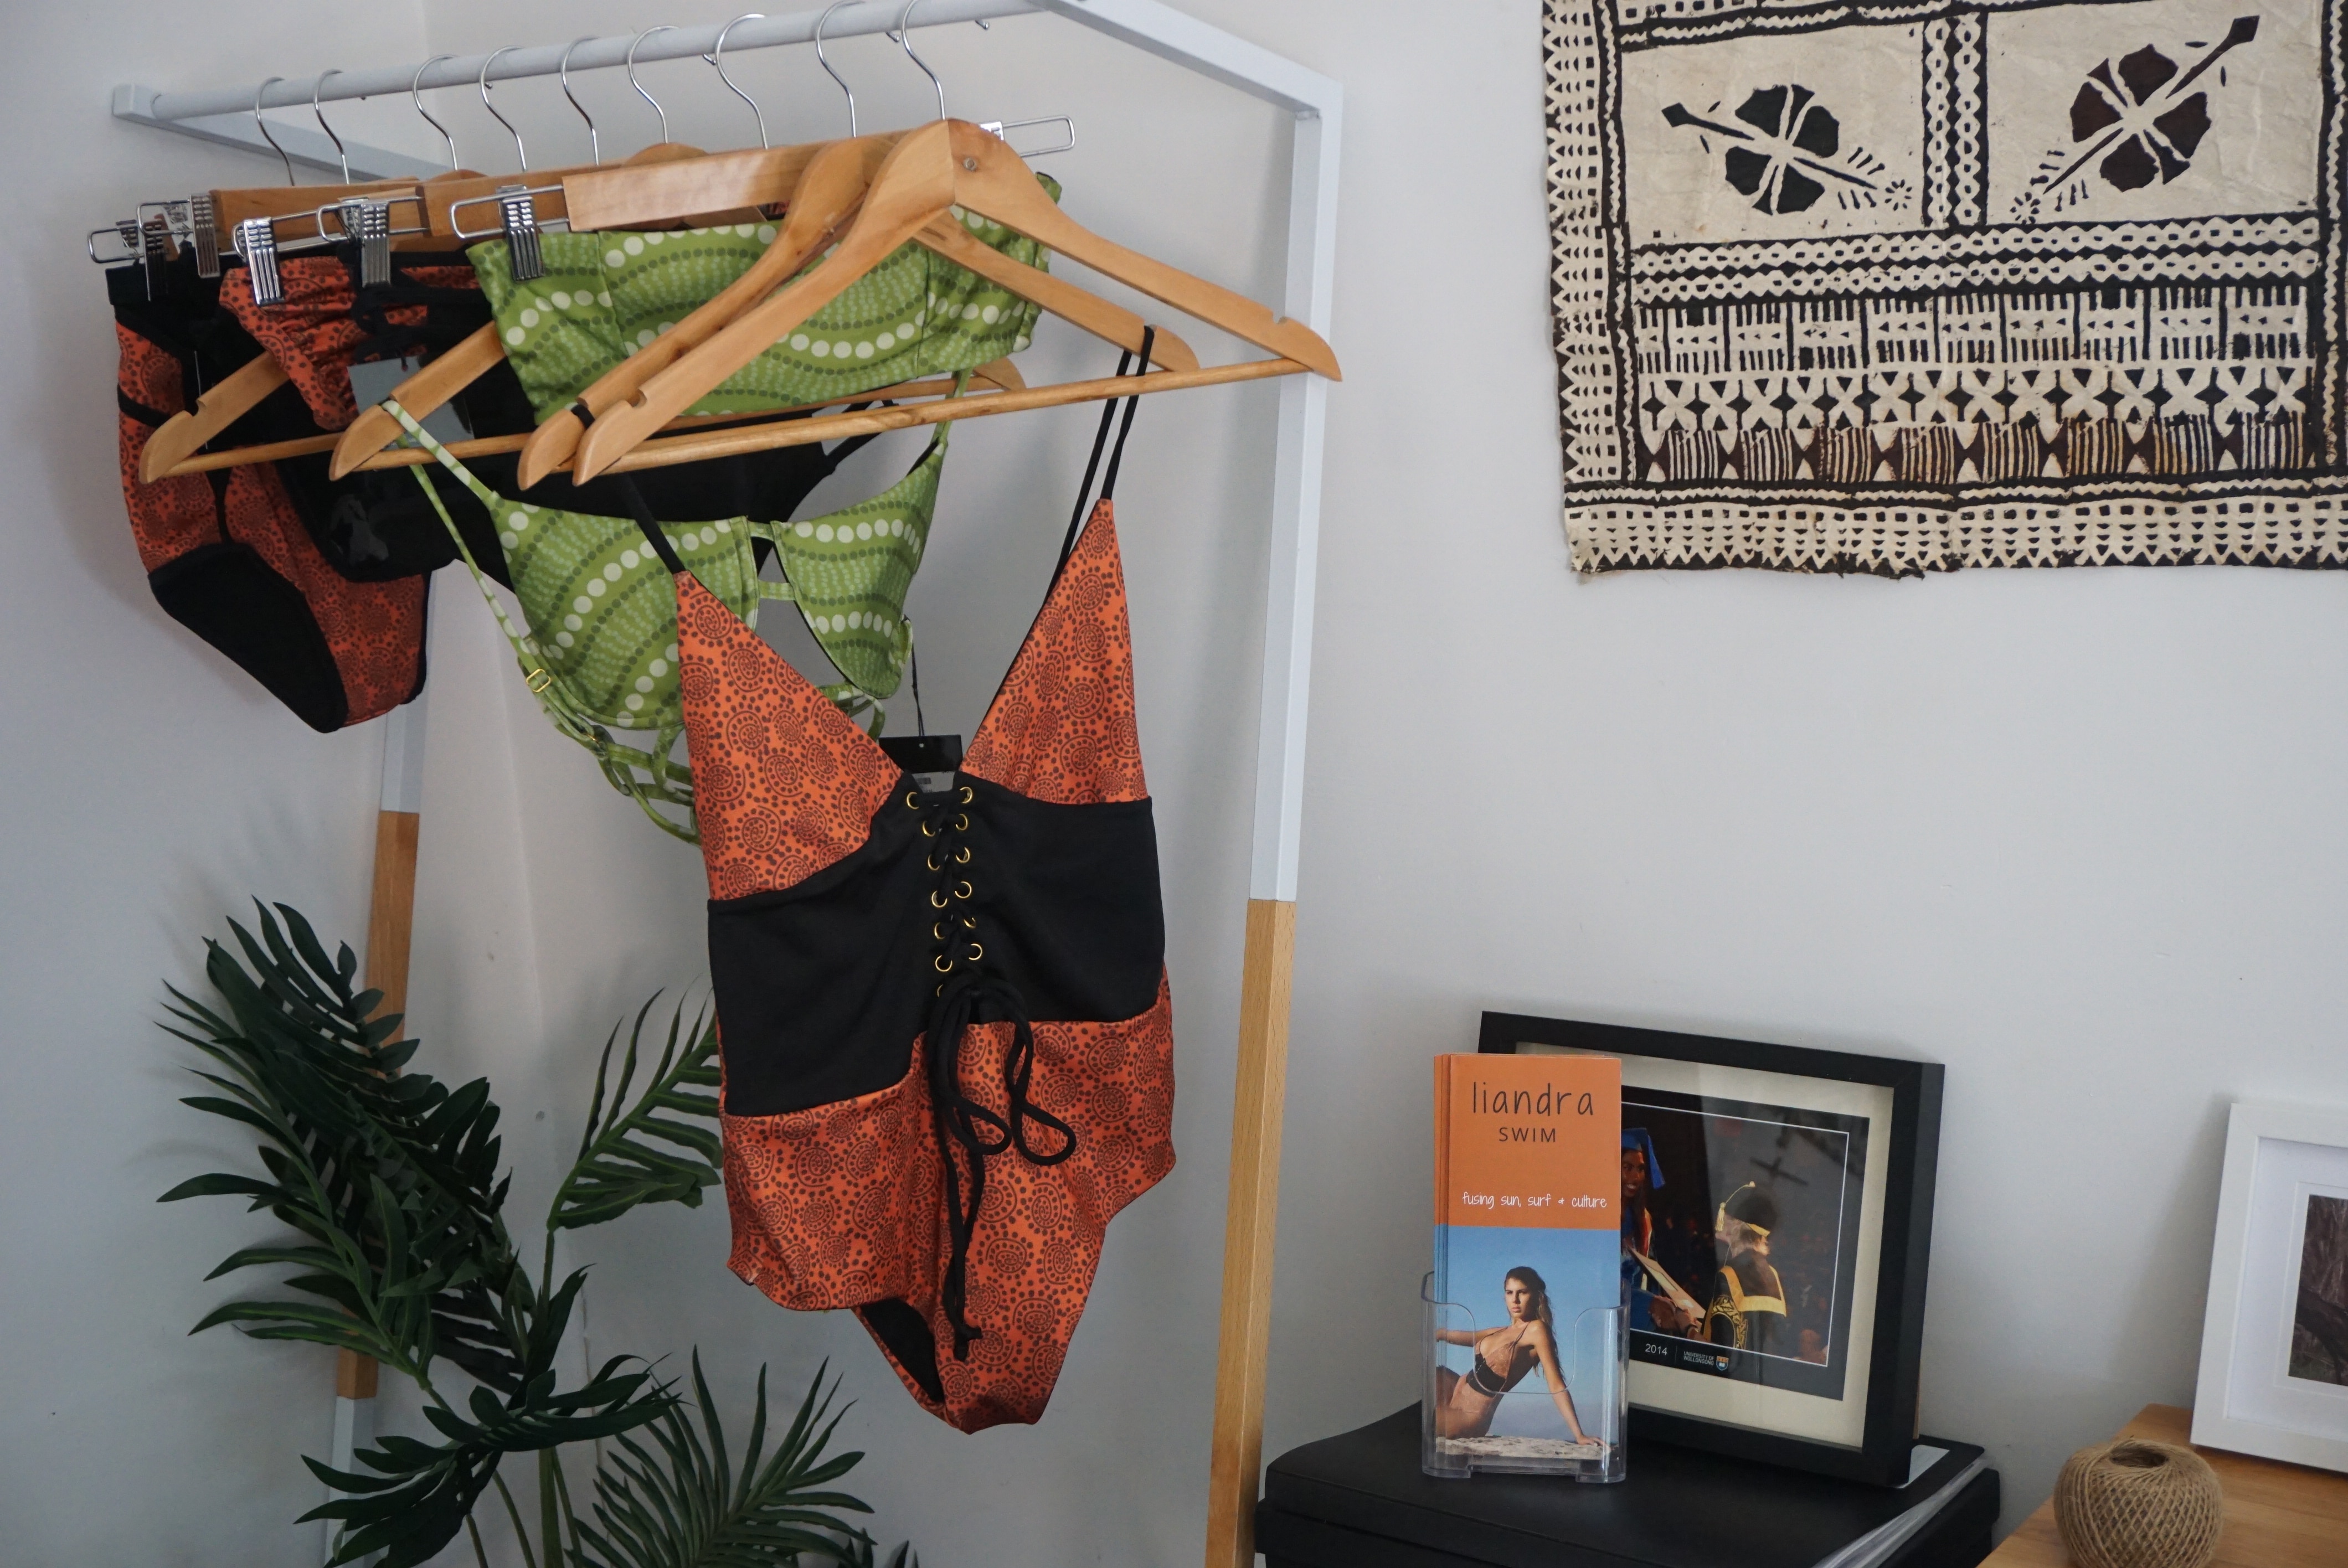 The Indigenous Fashion Designer Making Swimwear From Recycled Plastic